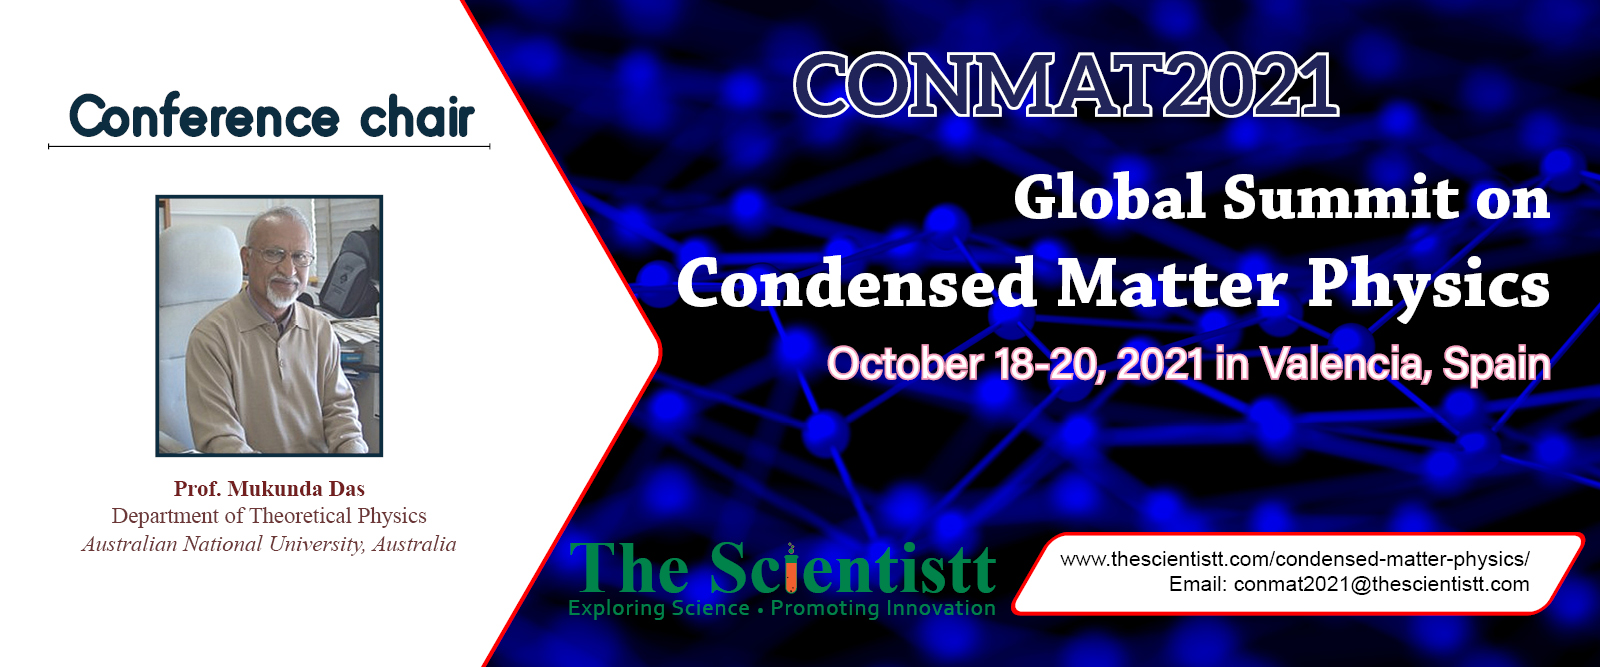 Global Summit on Condensed Matter Physics (CONMAT2021), Valencia, Spain